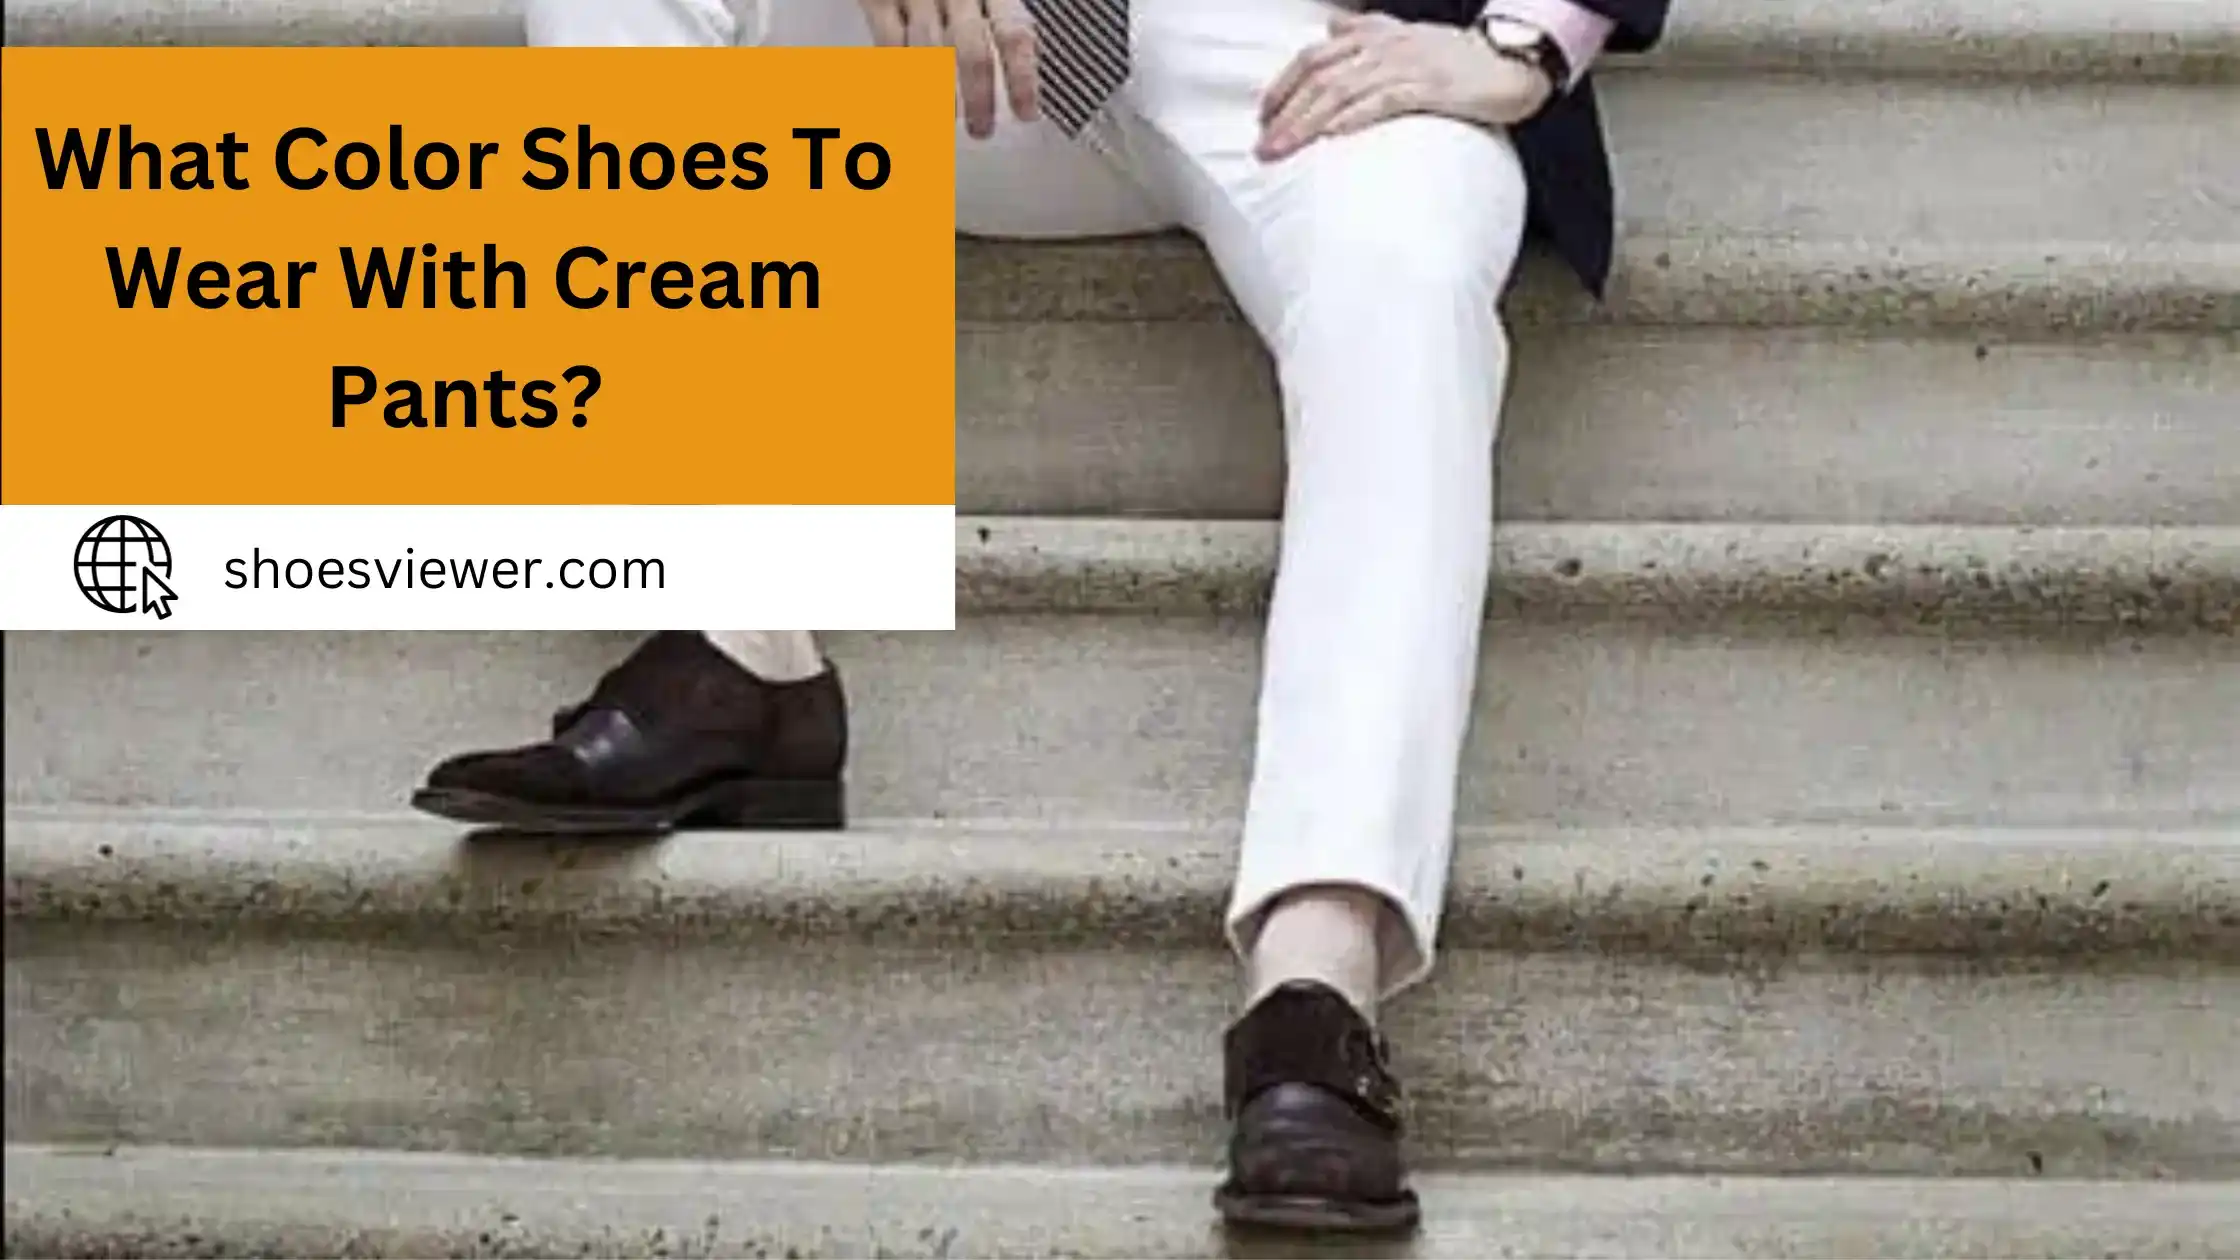 What Color Shoes To Wear With Cream Pants? Expert Choice